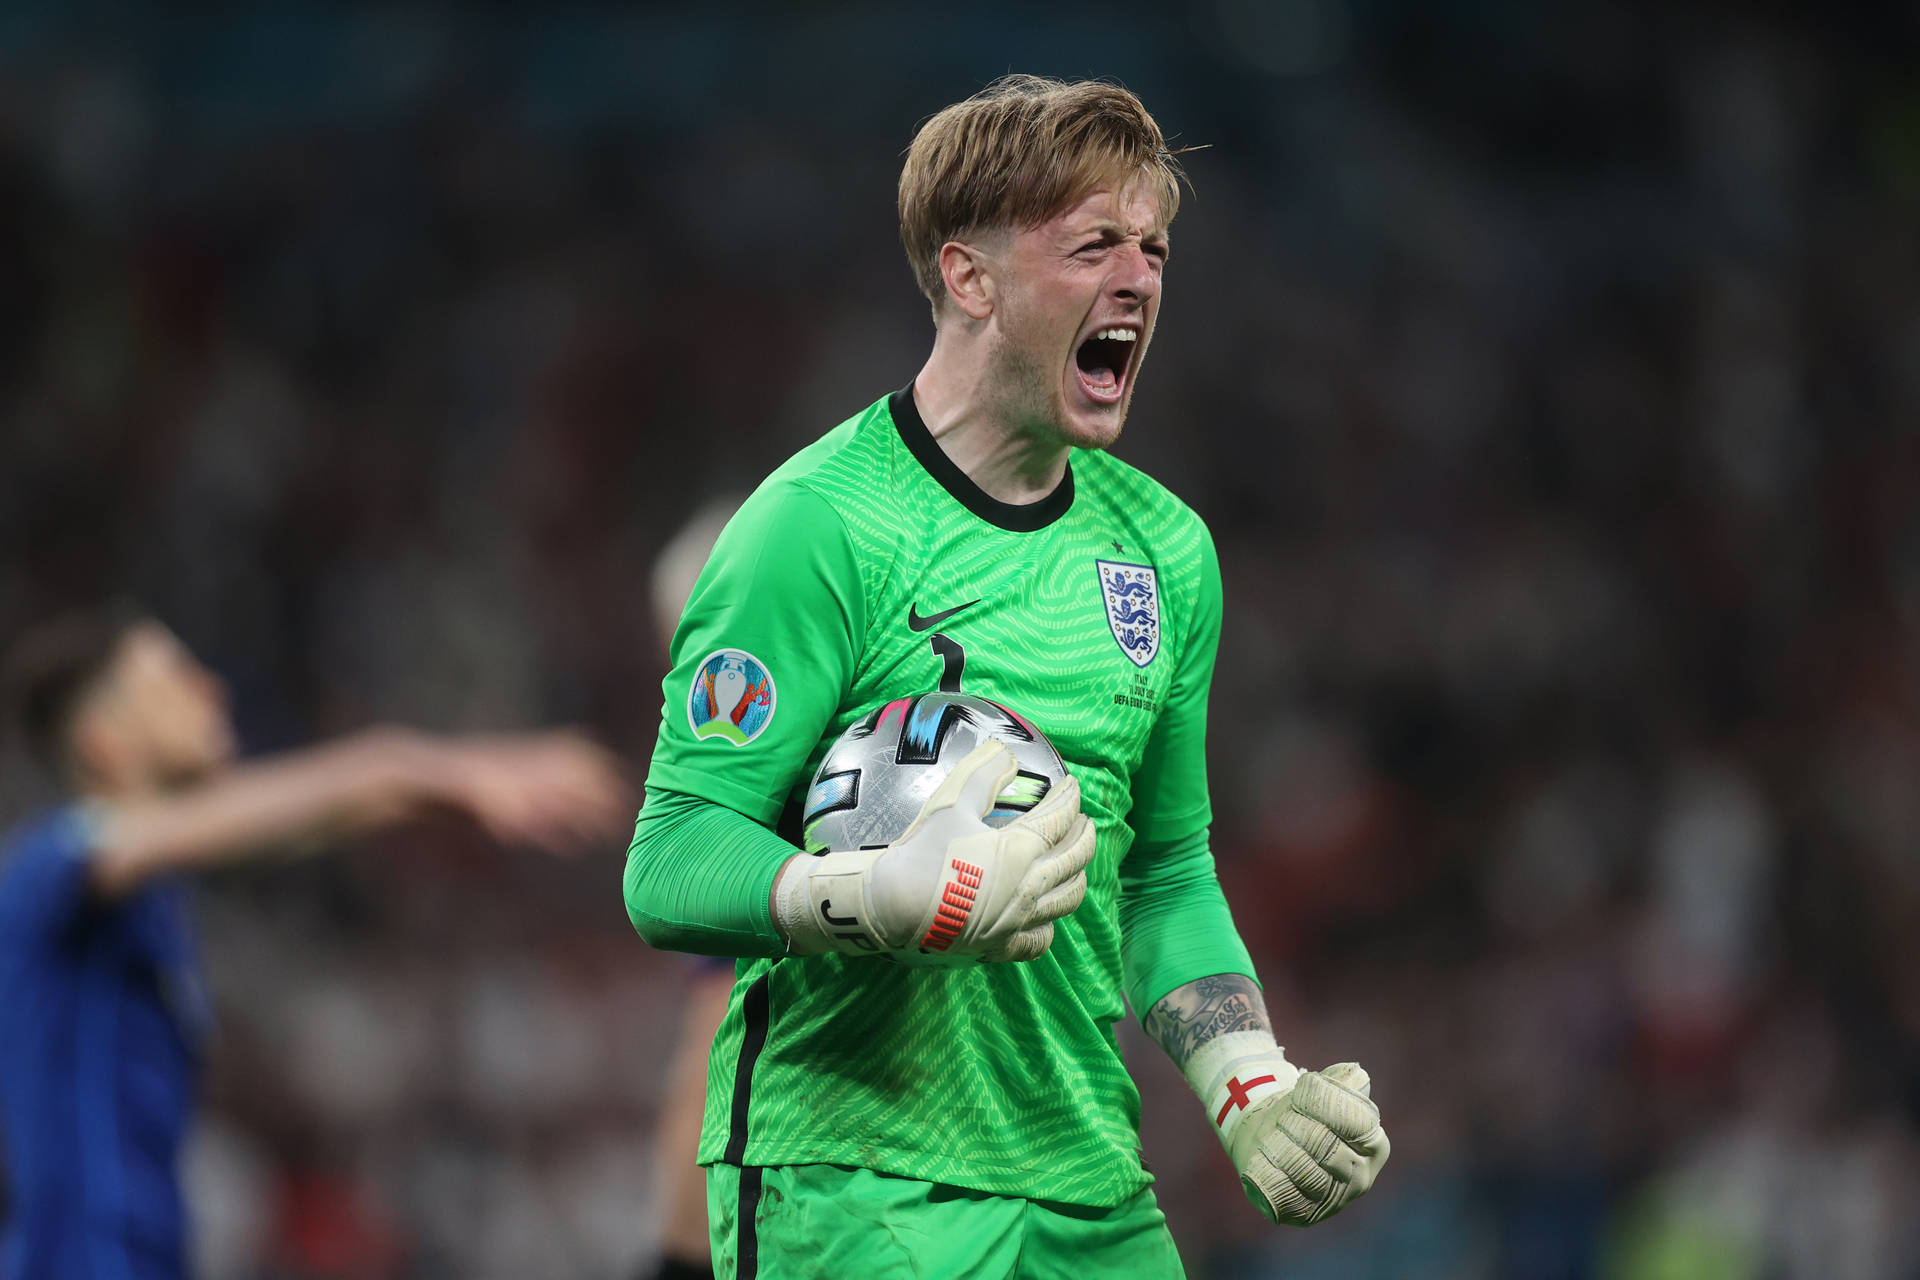 Jordan Pickford Yelling While Carrying Football Background